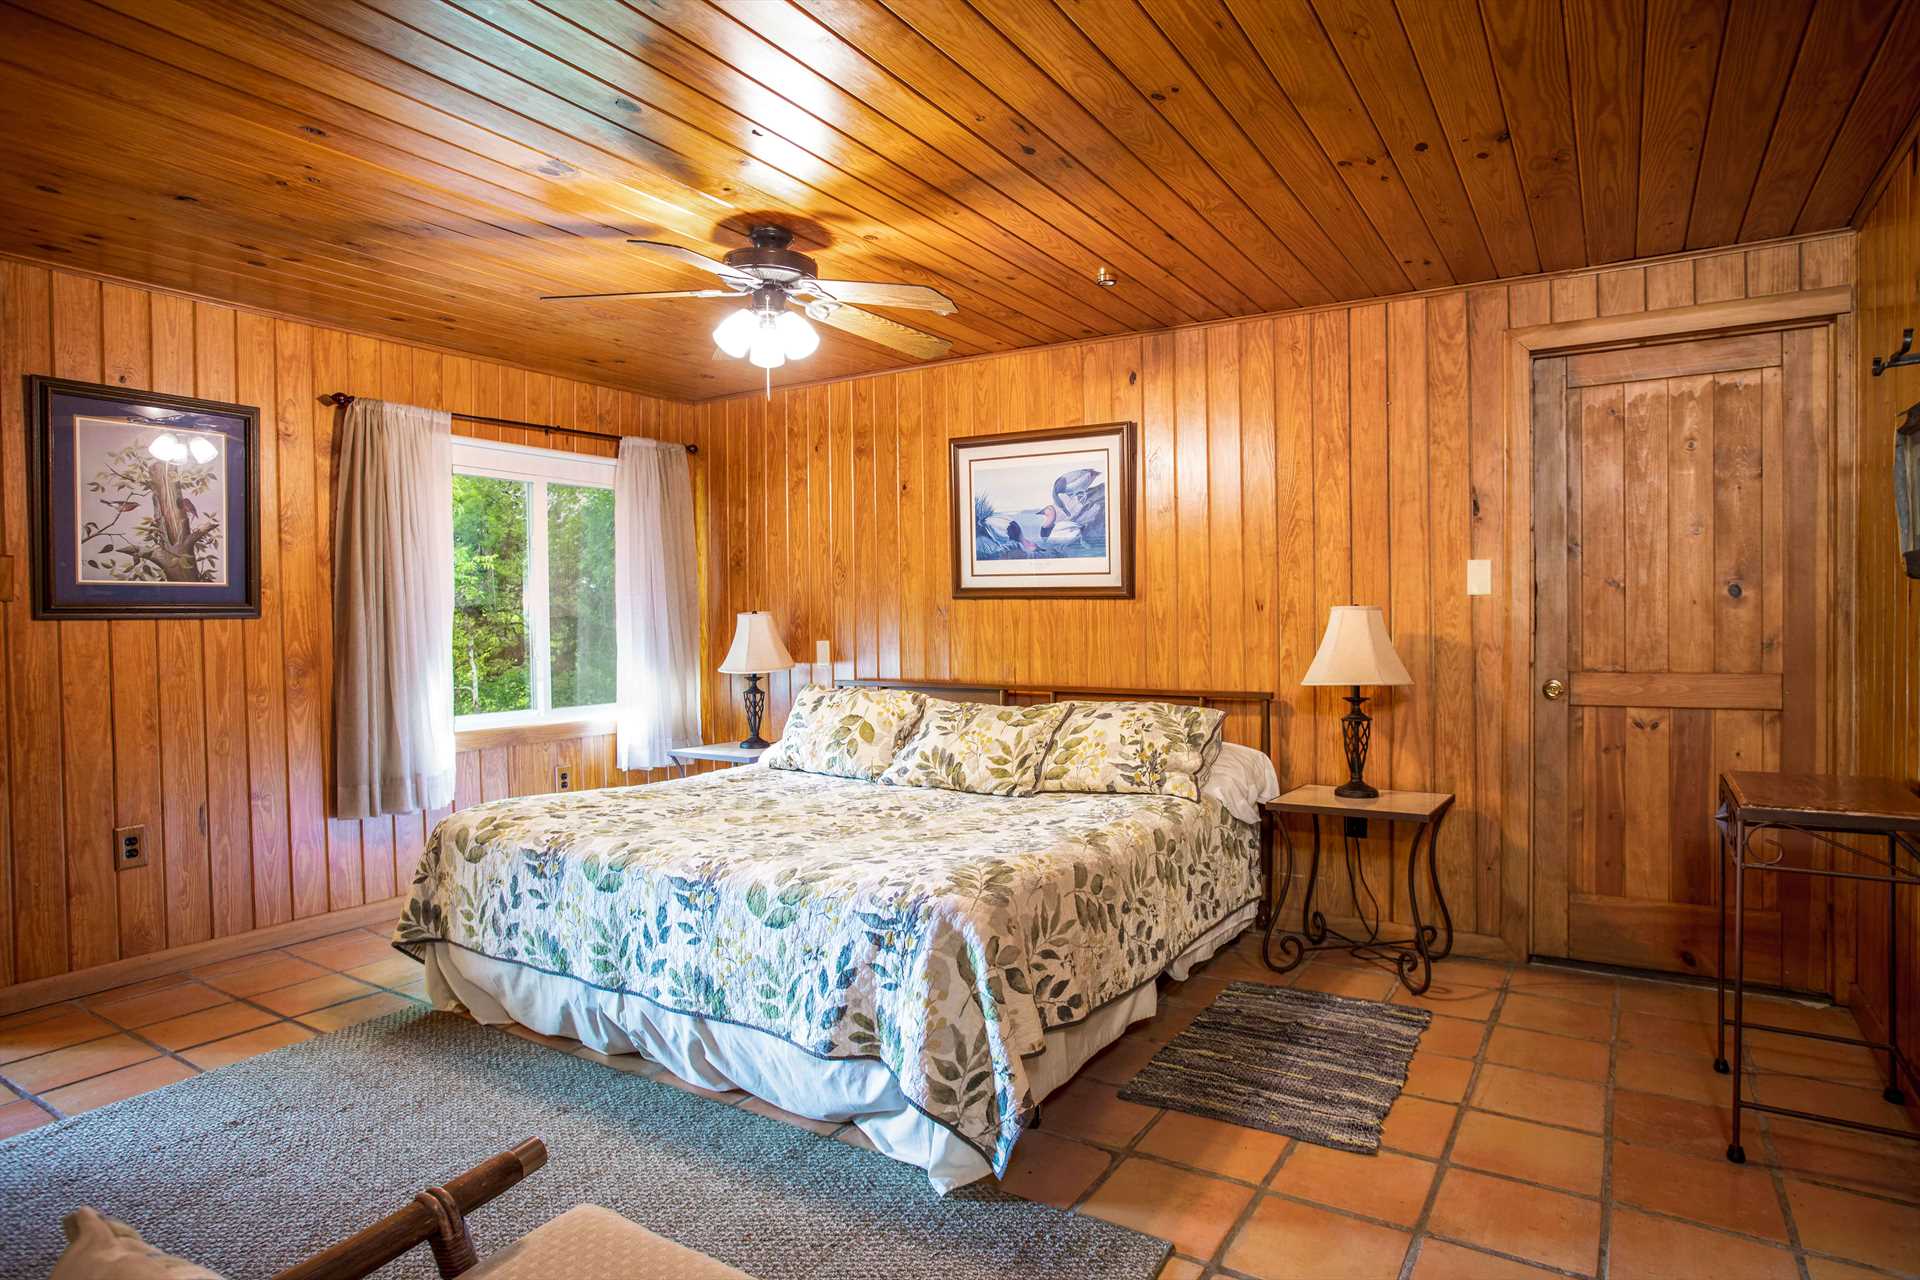                                                 A stately and comfortable king-sized bed awaits you in the second bedroom. All told, River Ridge provides peaceful slumber for up to ten people.